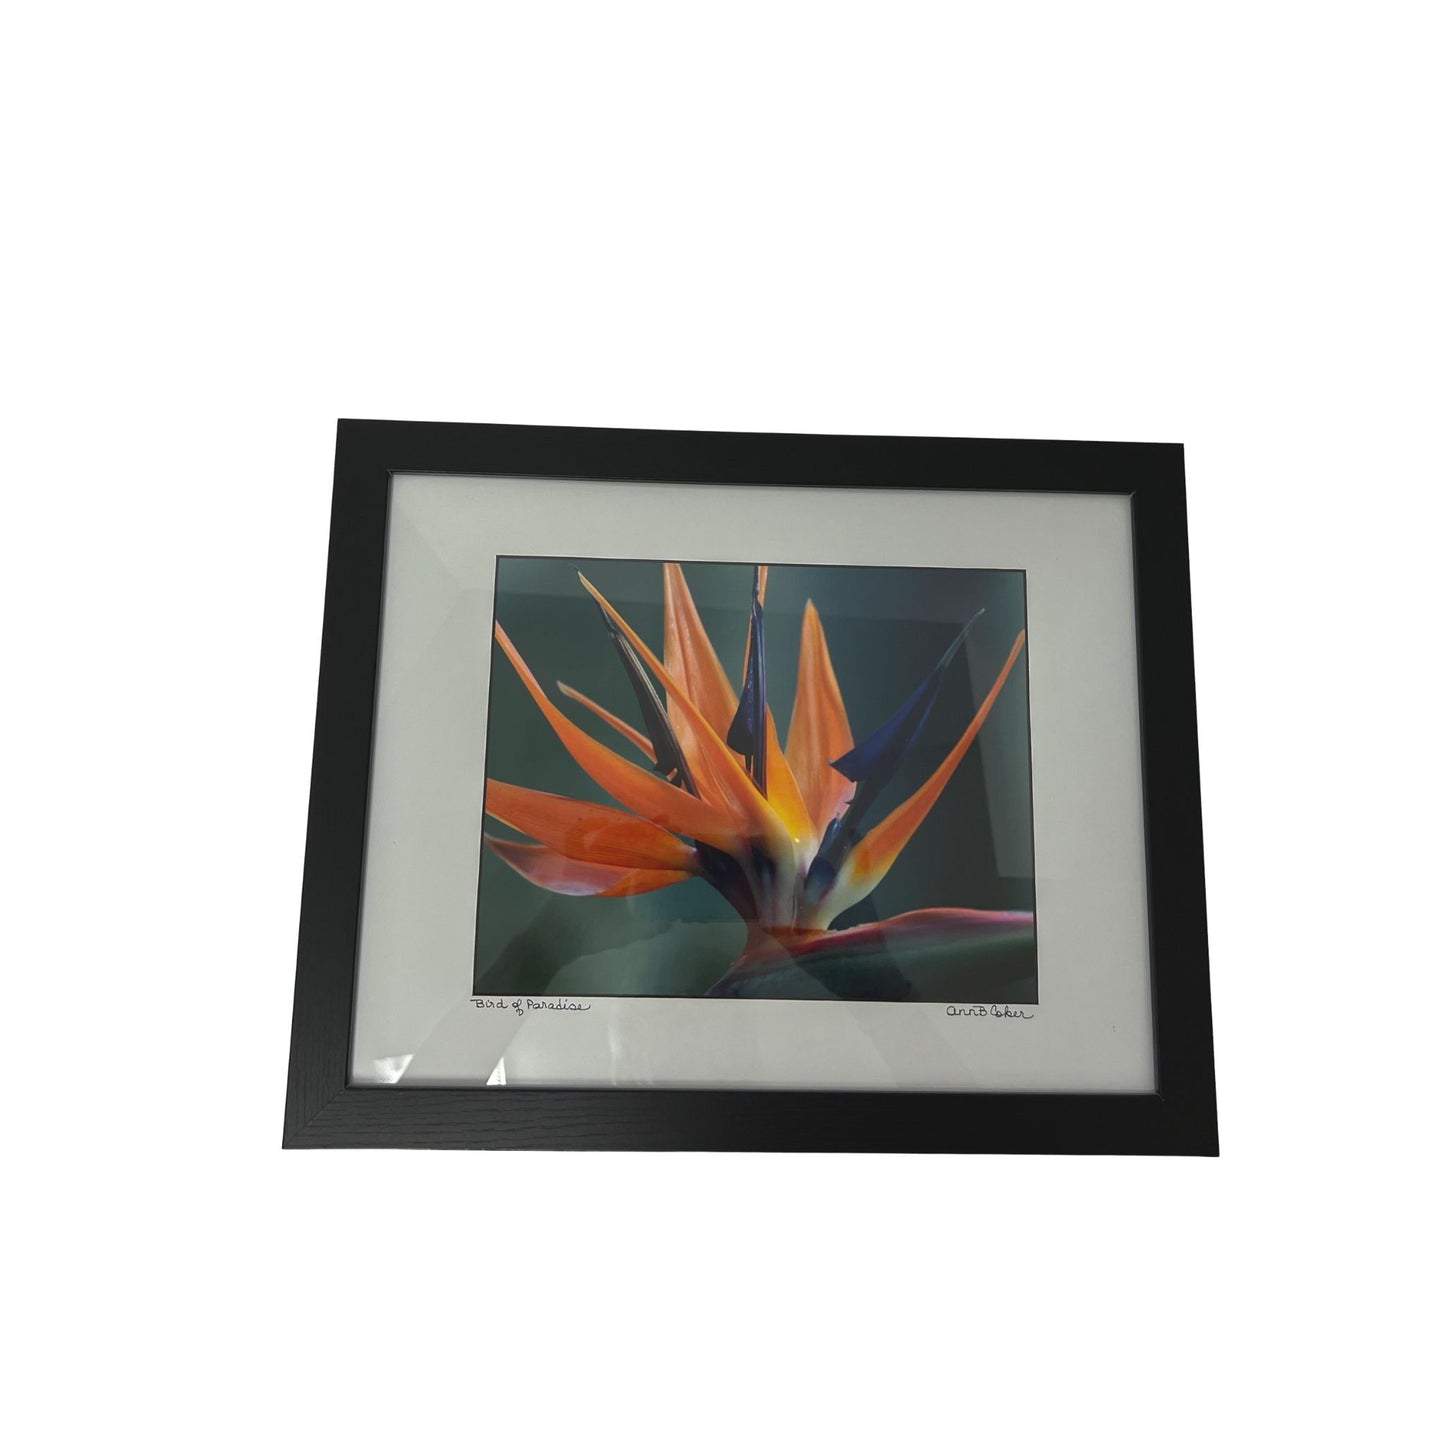 Bird of paradise photograph, matted, in black frame with glass